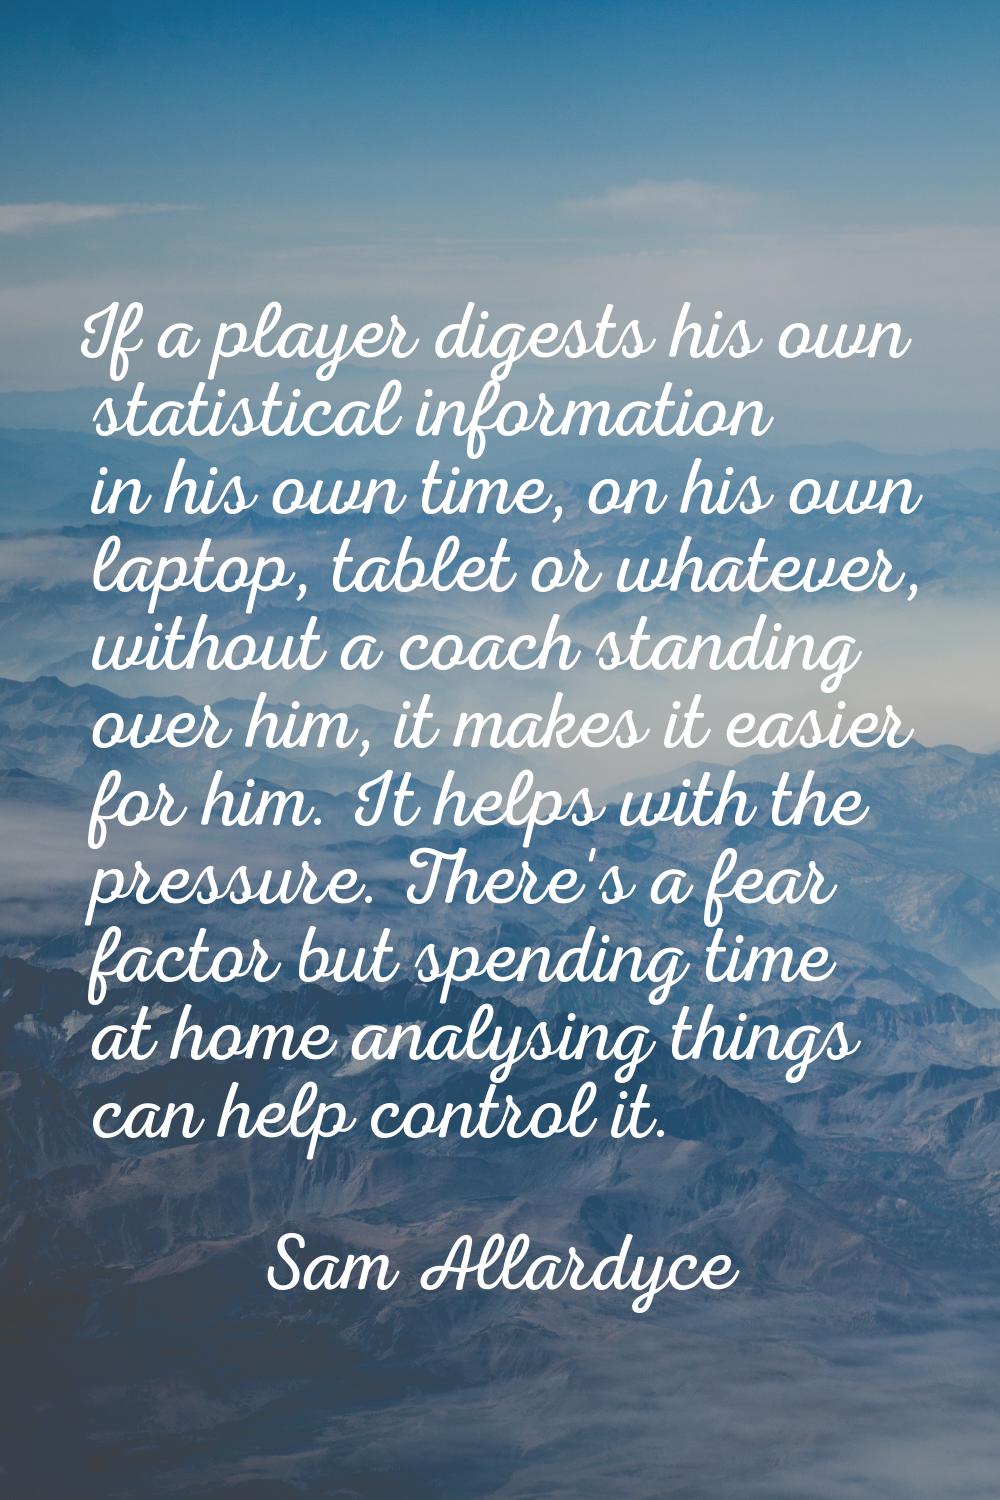 If a player digests his own statistical information in his own time, on his own laptop, tablet or w